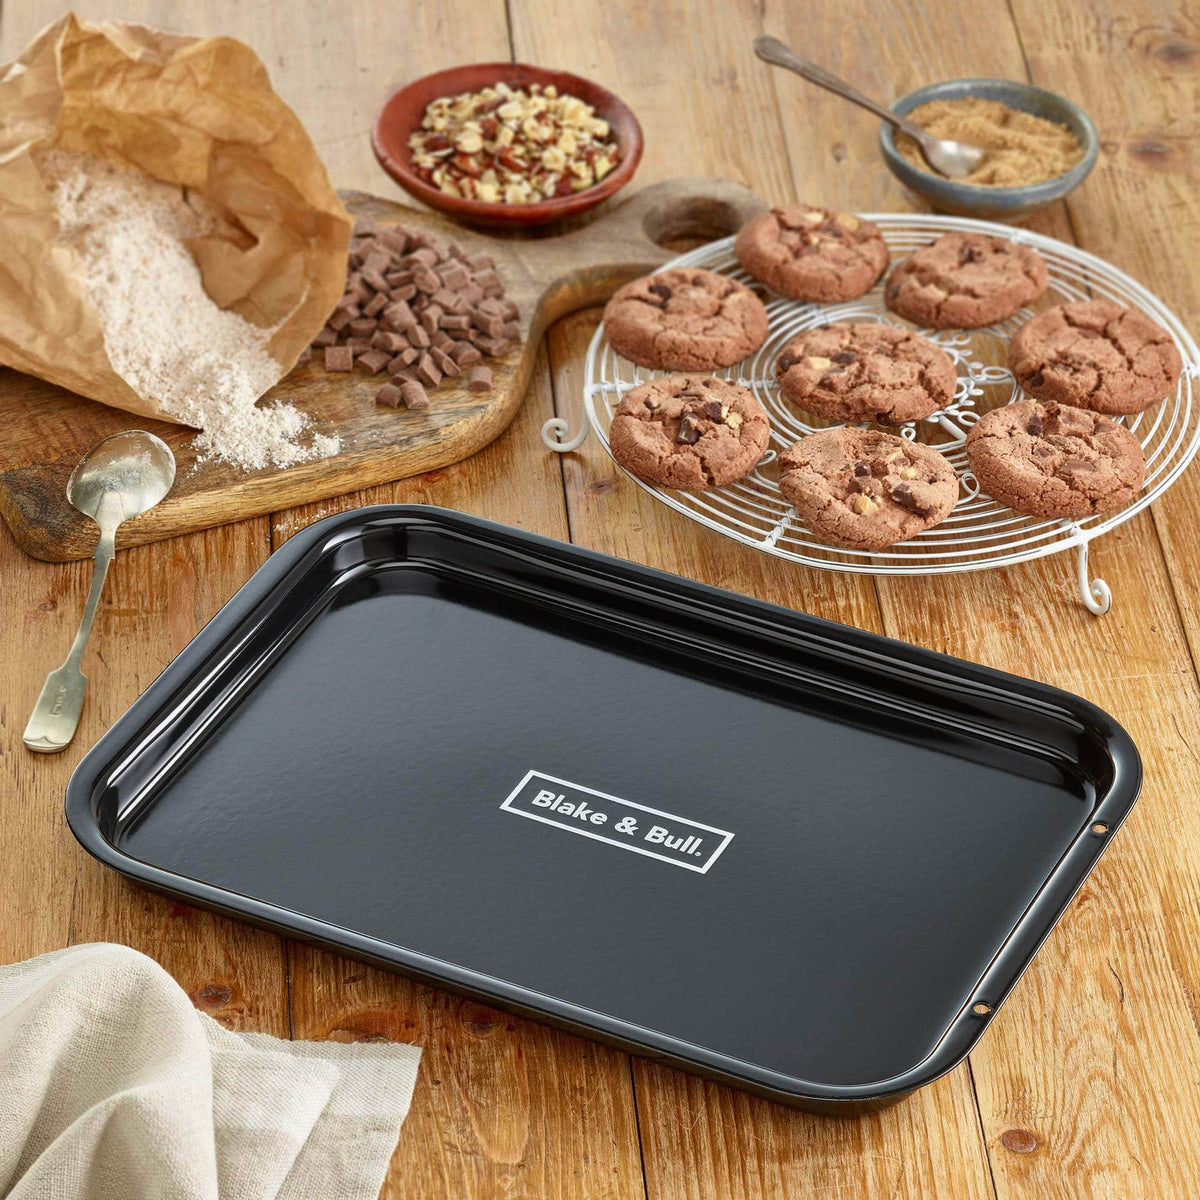 &#39;Fits on runners&#39; black enamelled baking tray for use with Aga range cookers &#39;half oven&#39; size